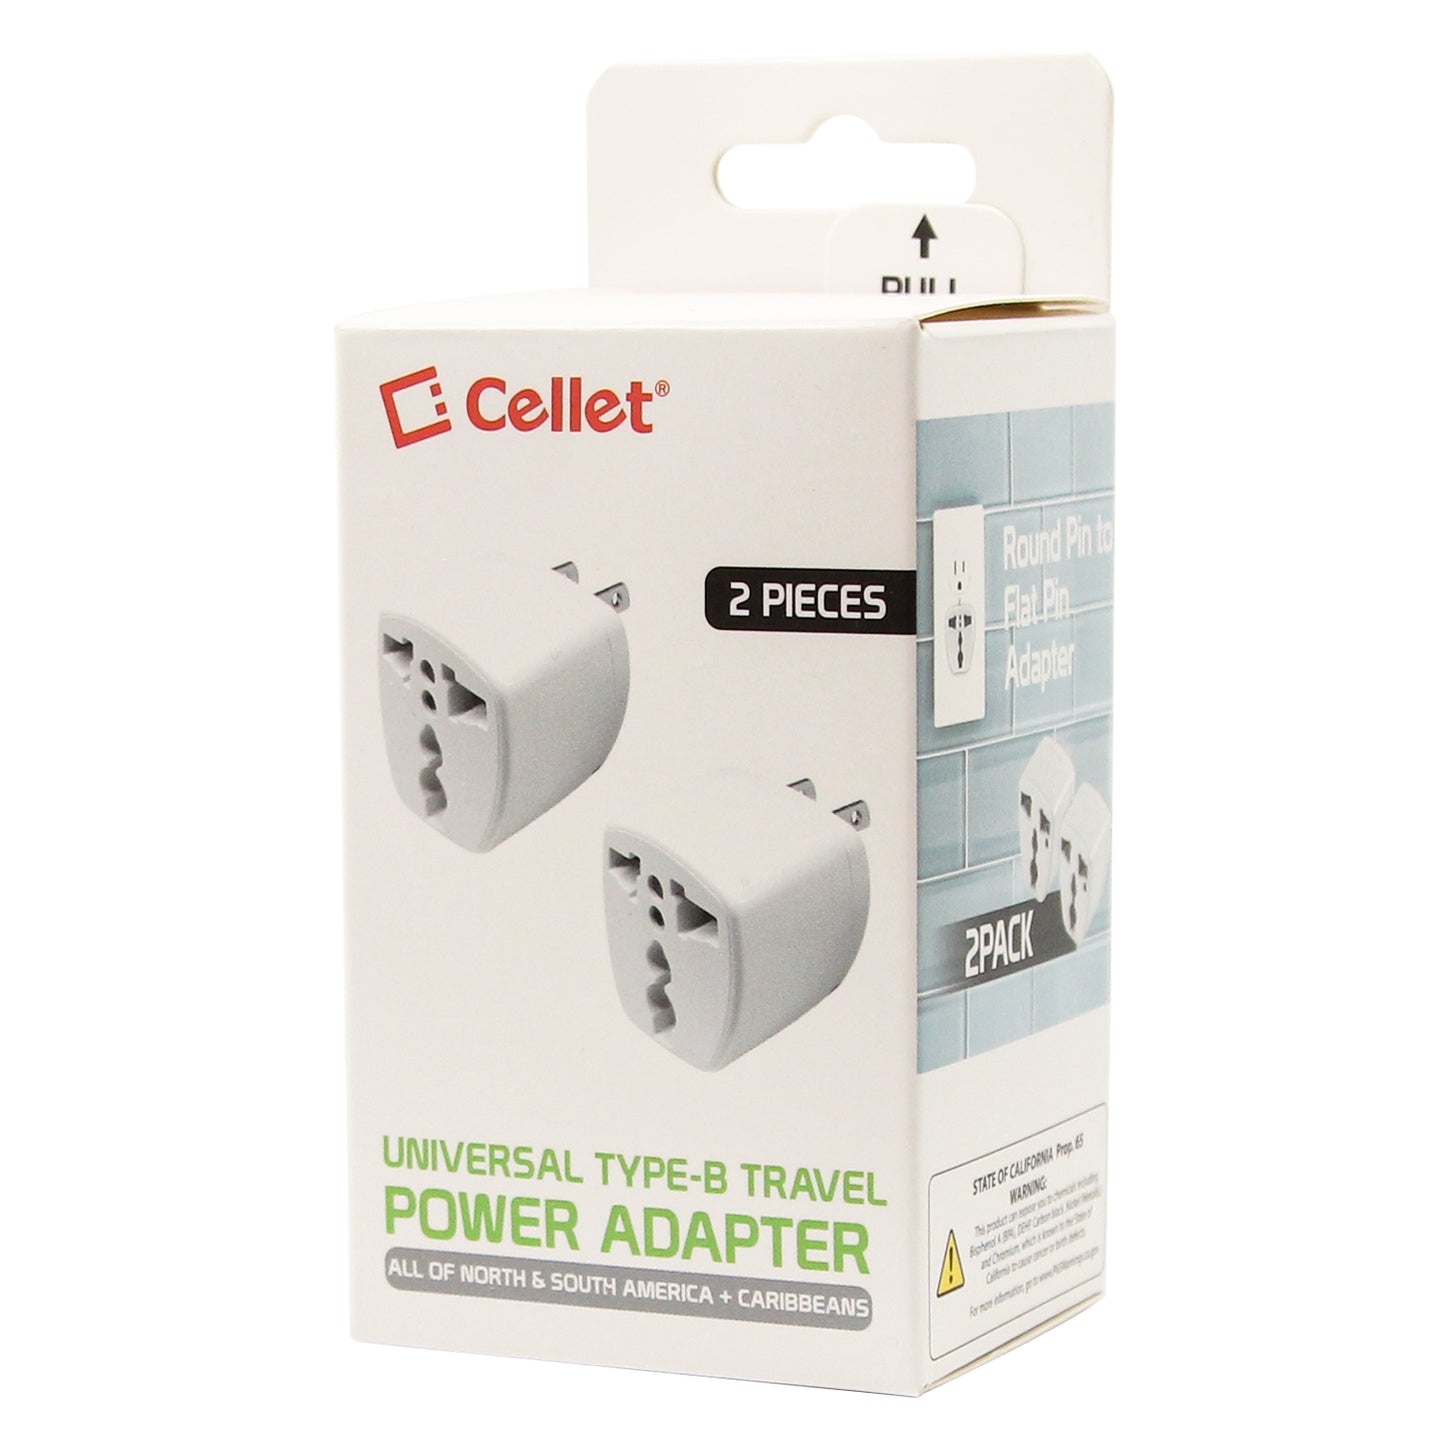 CNFPINBUS - Cellet Universal Travel AC Wall Power Adapter to Convert China, UK, AU, EU & other Plugs to US Plug Socket (2-PACK)